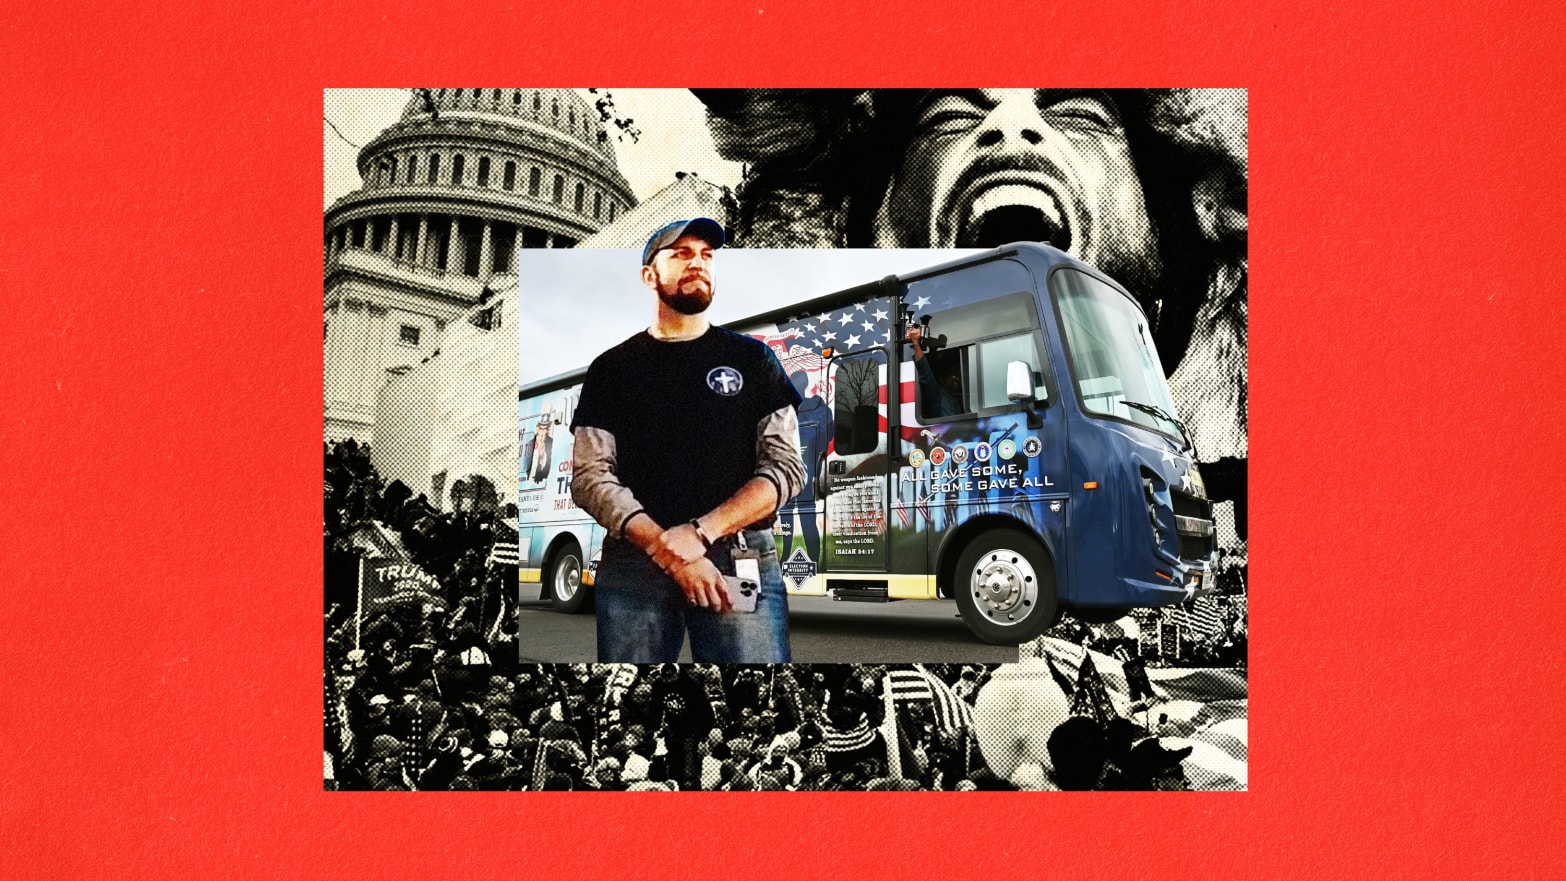  A photo illustration of Joshua Macias in front of a bus emblazoned in an American flag from a Take Back our Border rally. Behind them are black and white pictures from the January 6 insurrection.